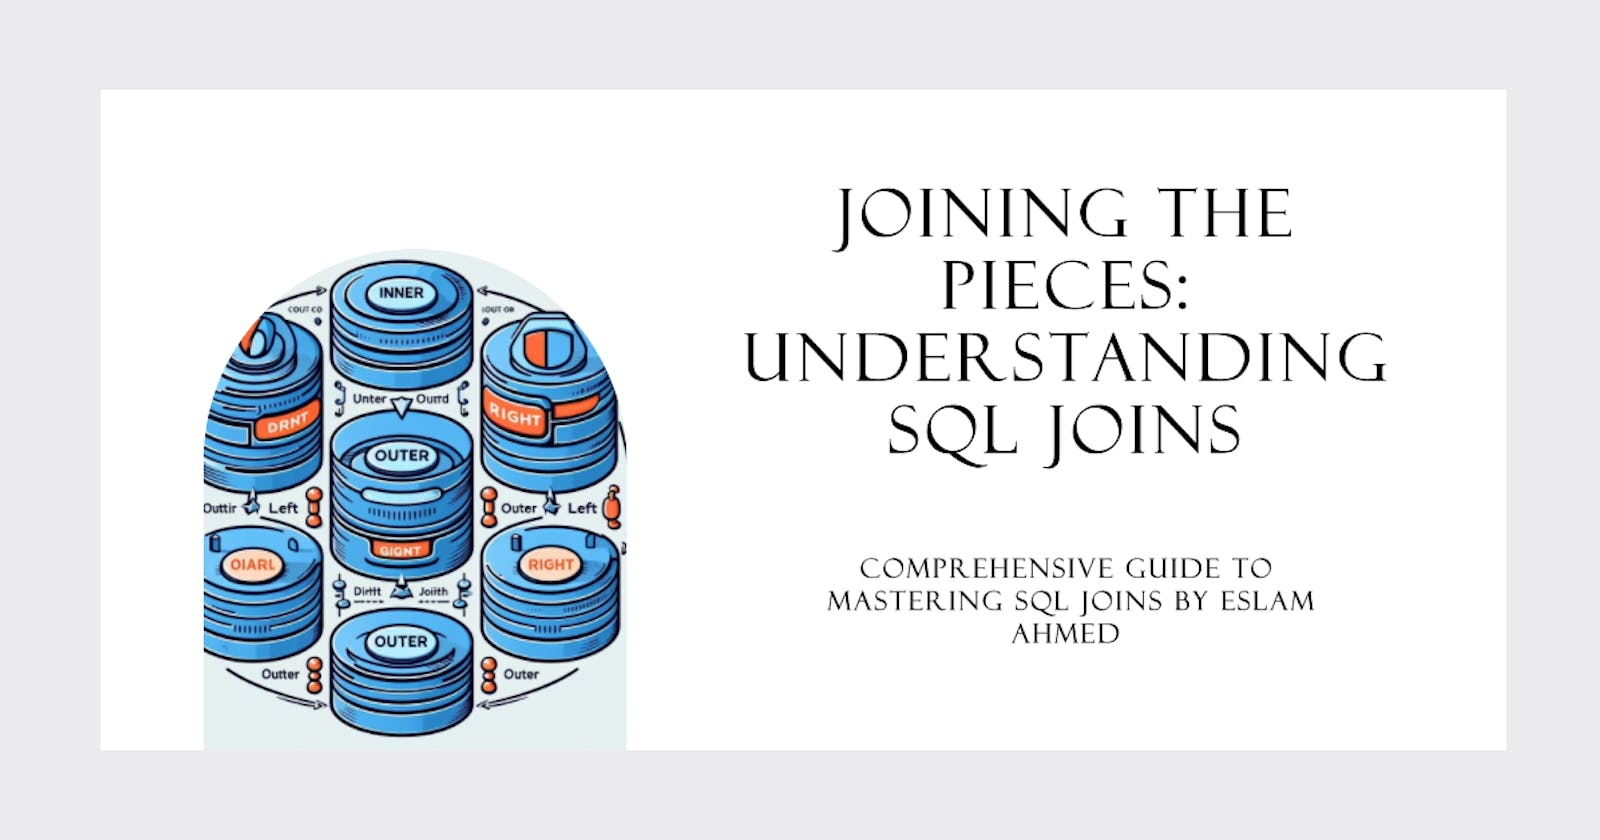 Joining the Pieces: Understanding SQL Joins